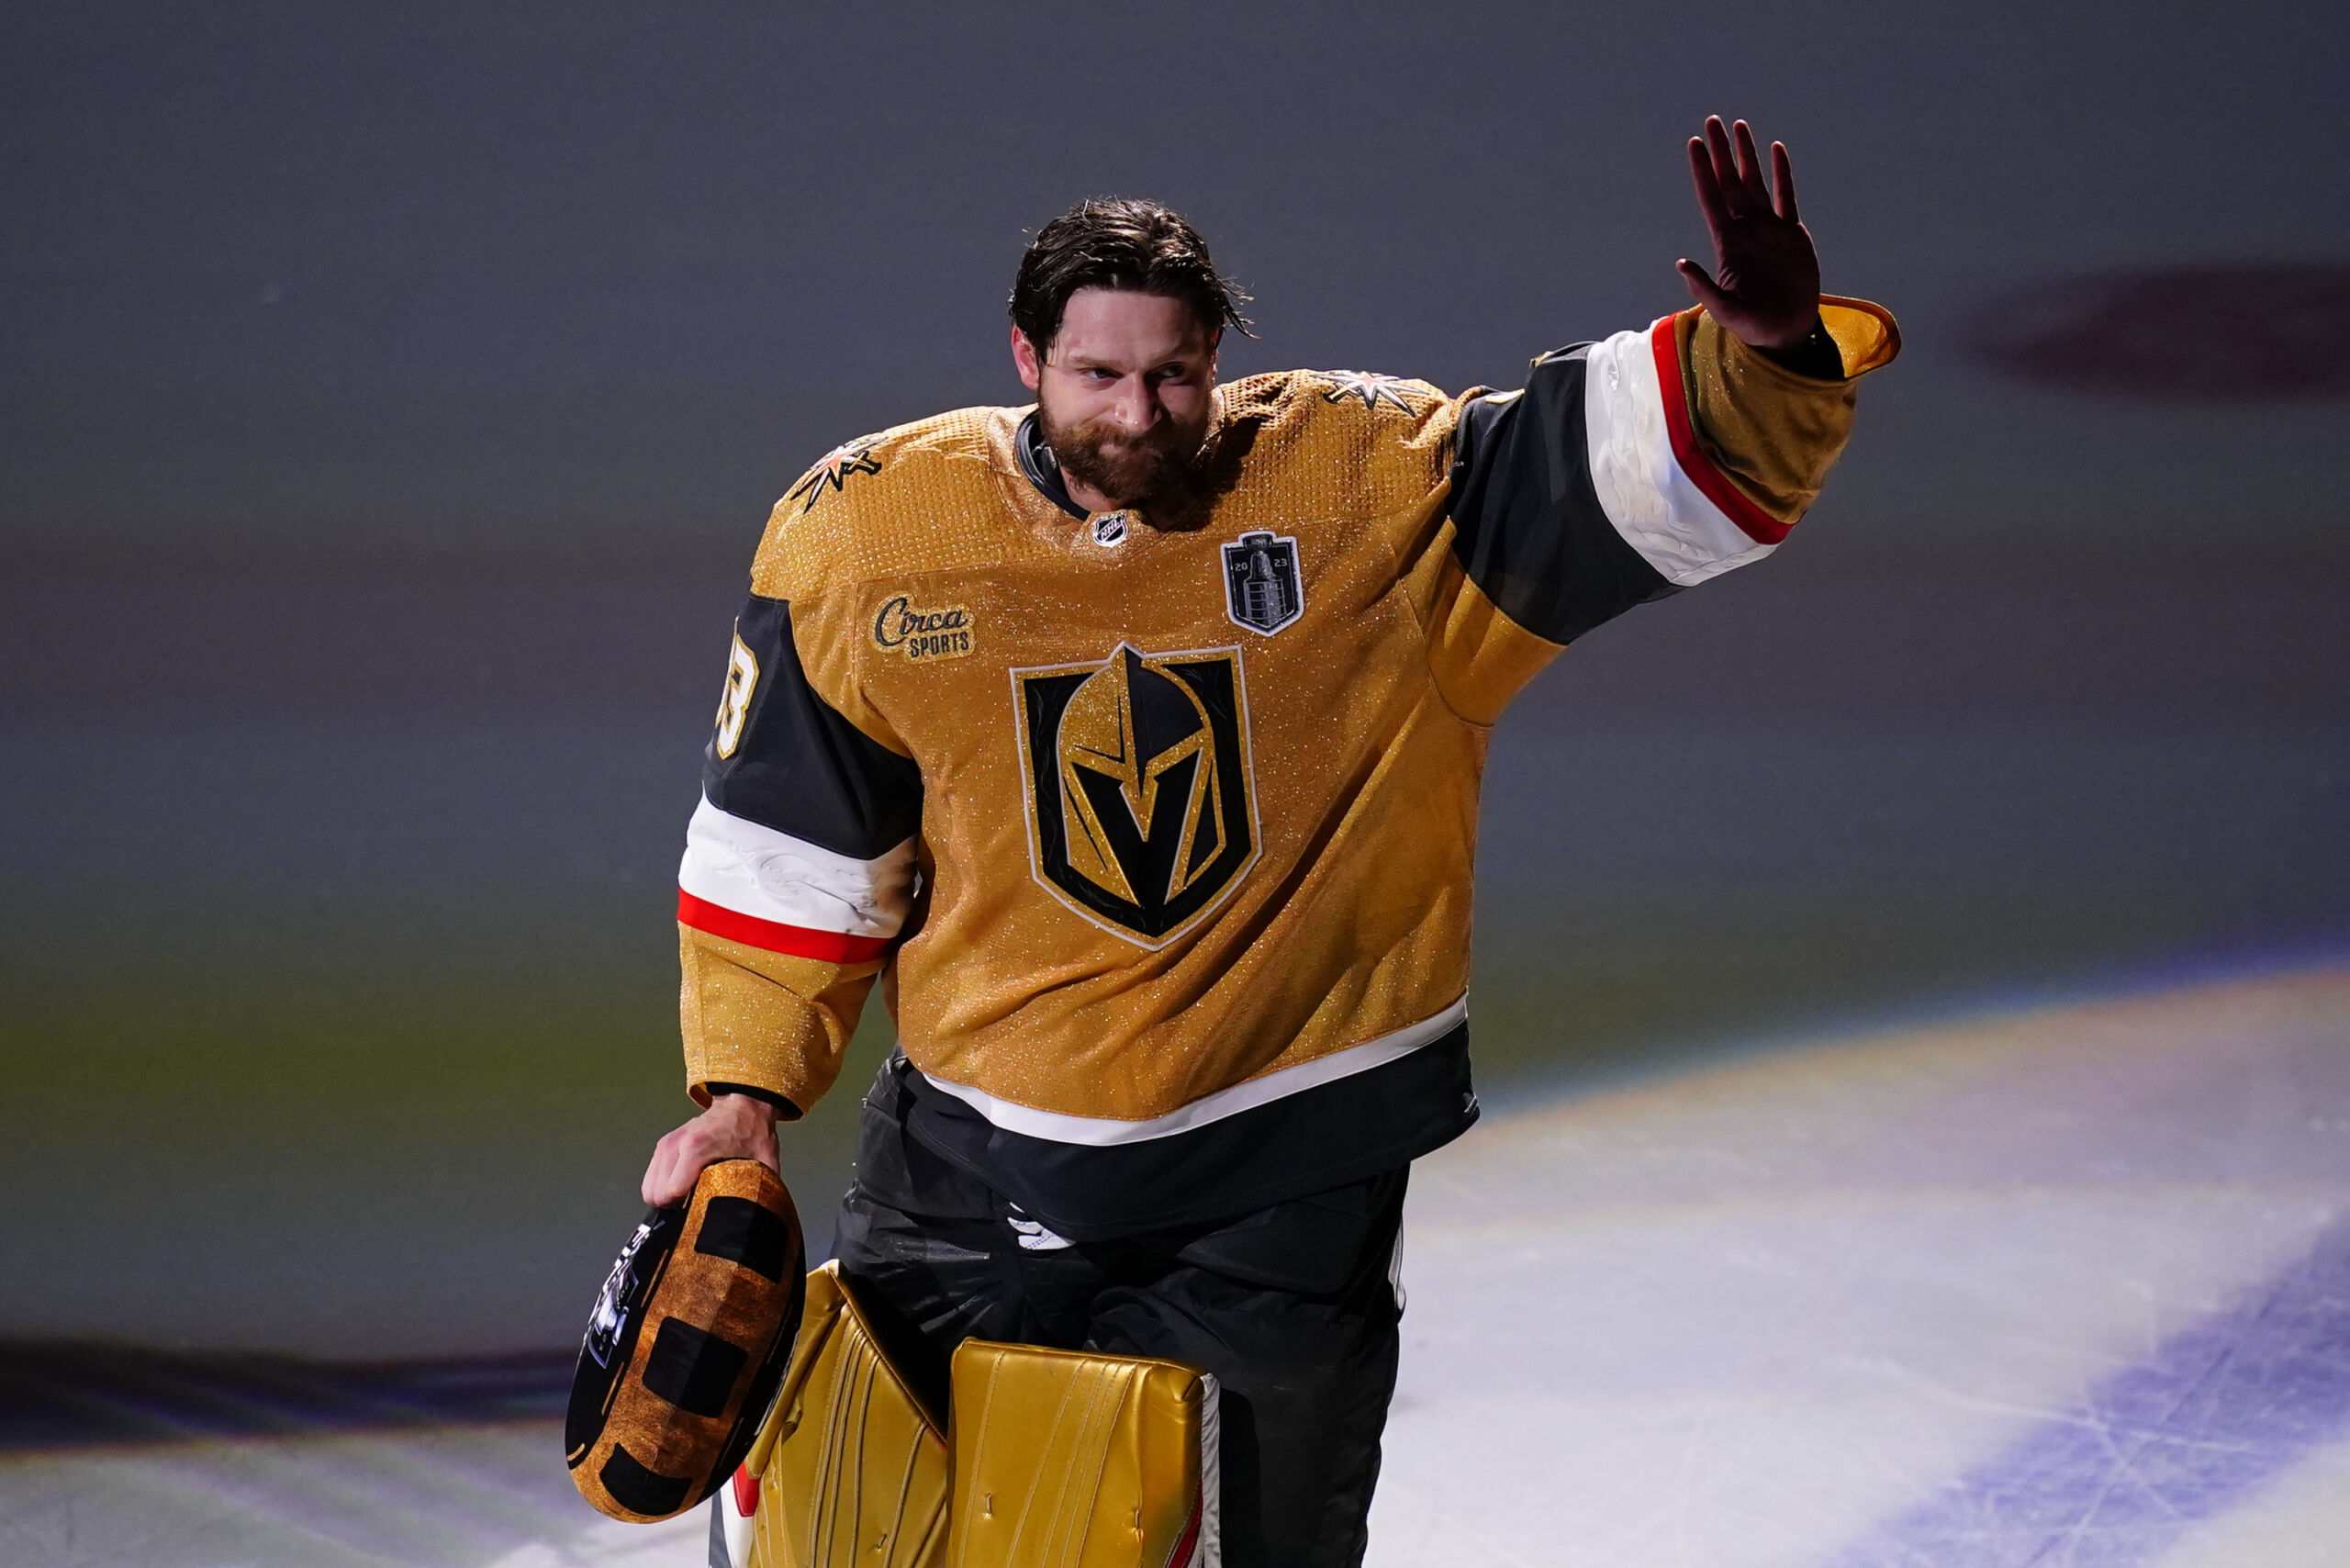 You probably can't afford to attend a Vegas Golden Knights playoff